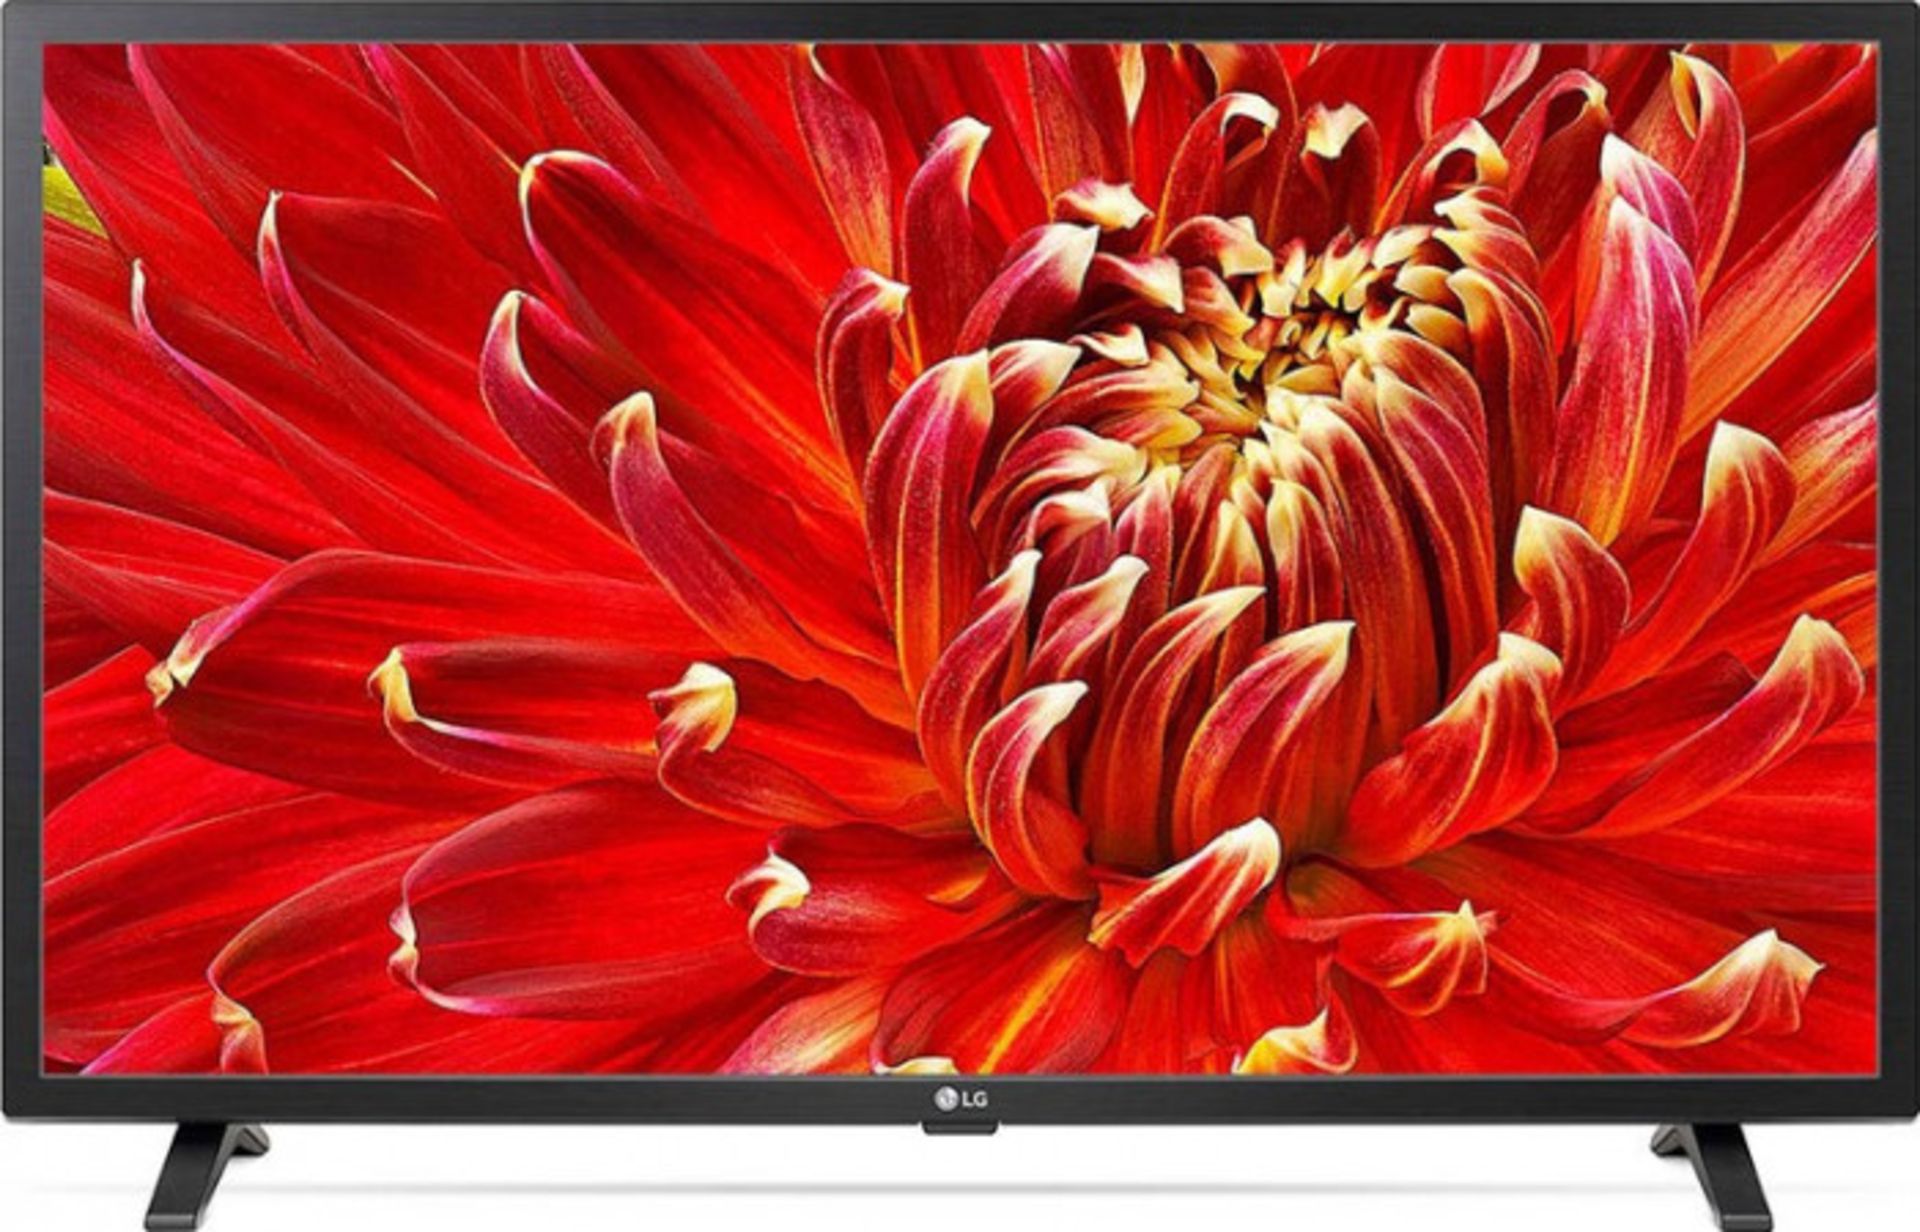 V Grade A LG 32 Inch HDR FULL HD LED SMART TV WITH FREEVIEW HD, WEBOS, WIFI 32LM6300PLA.AEU